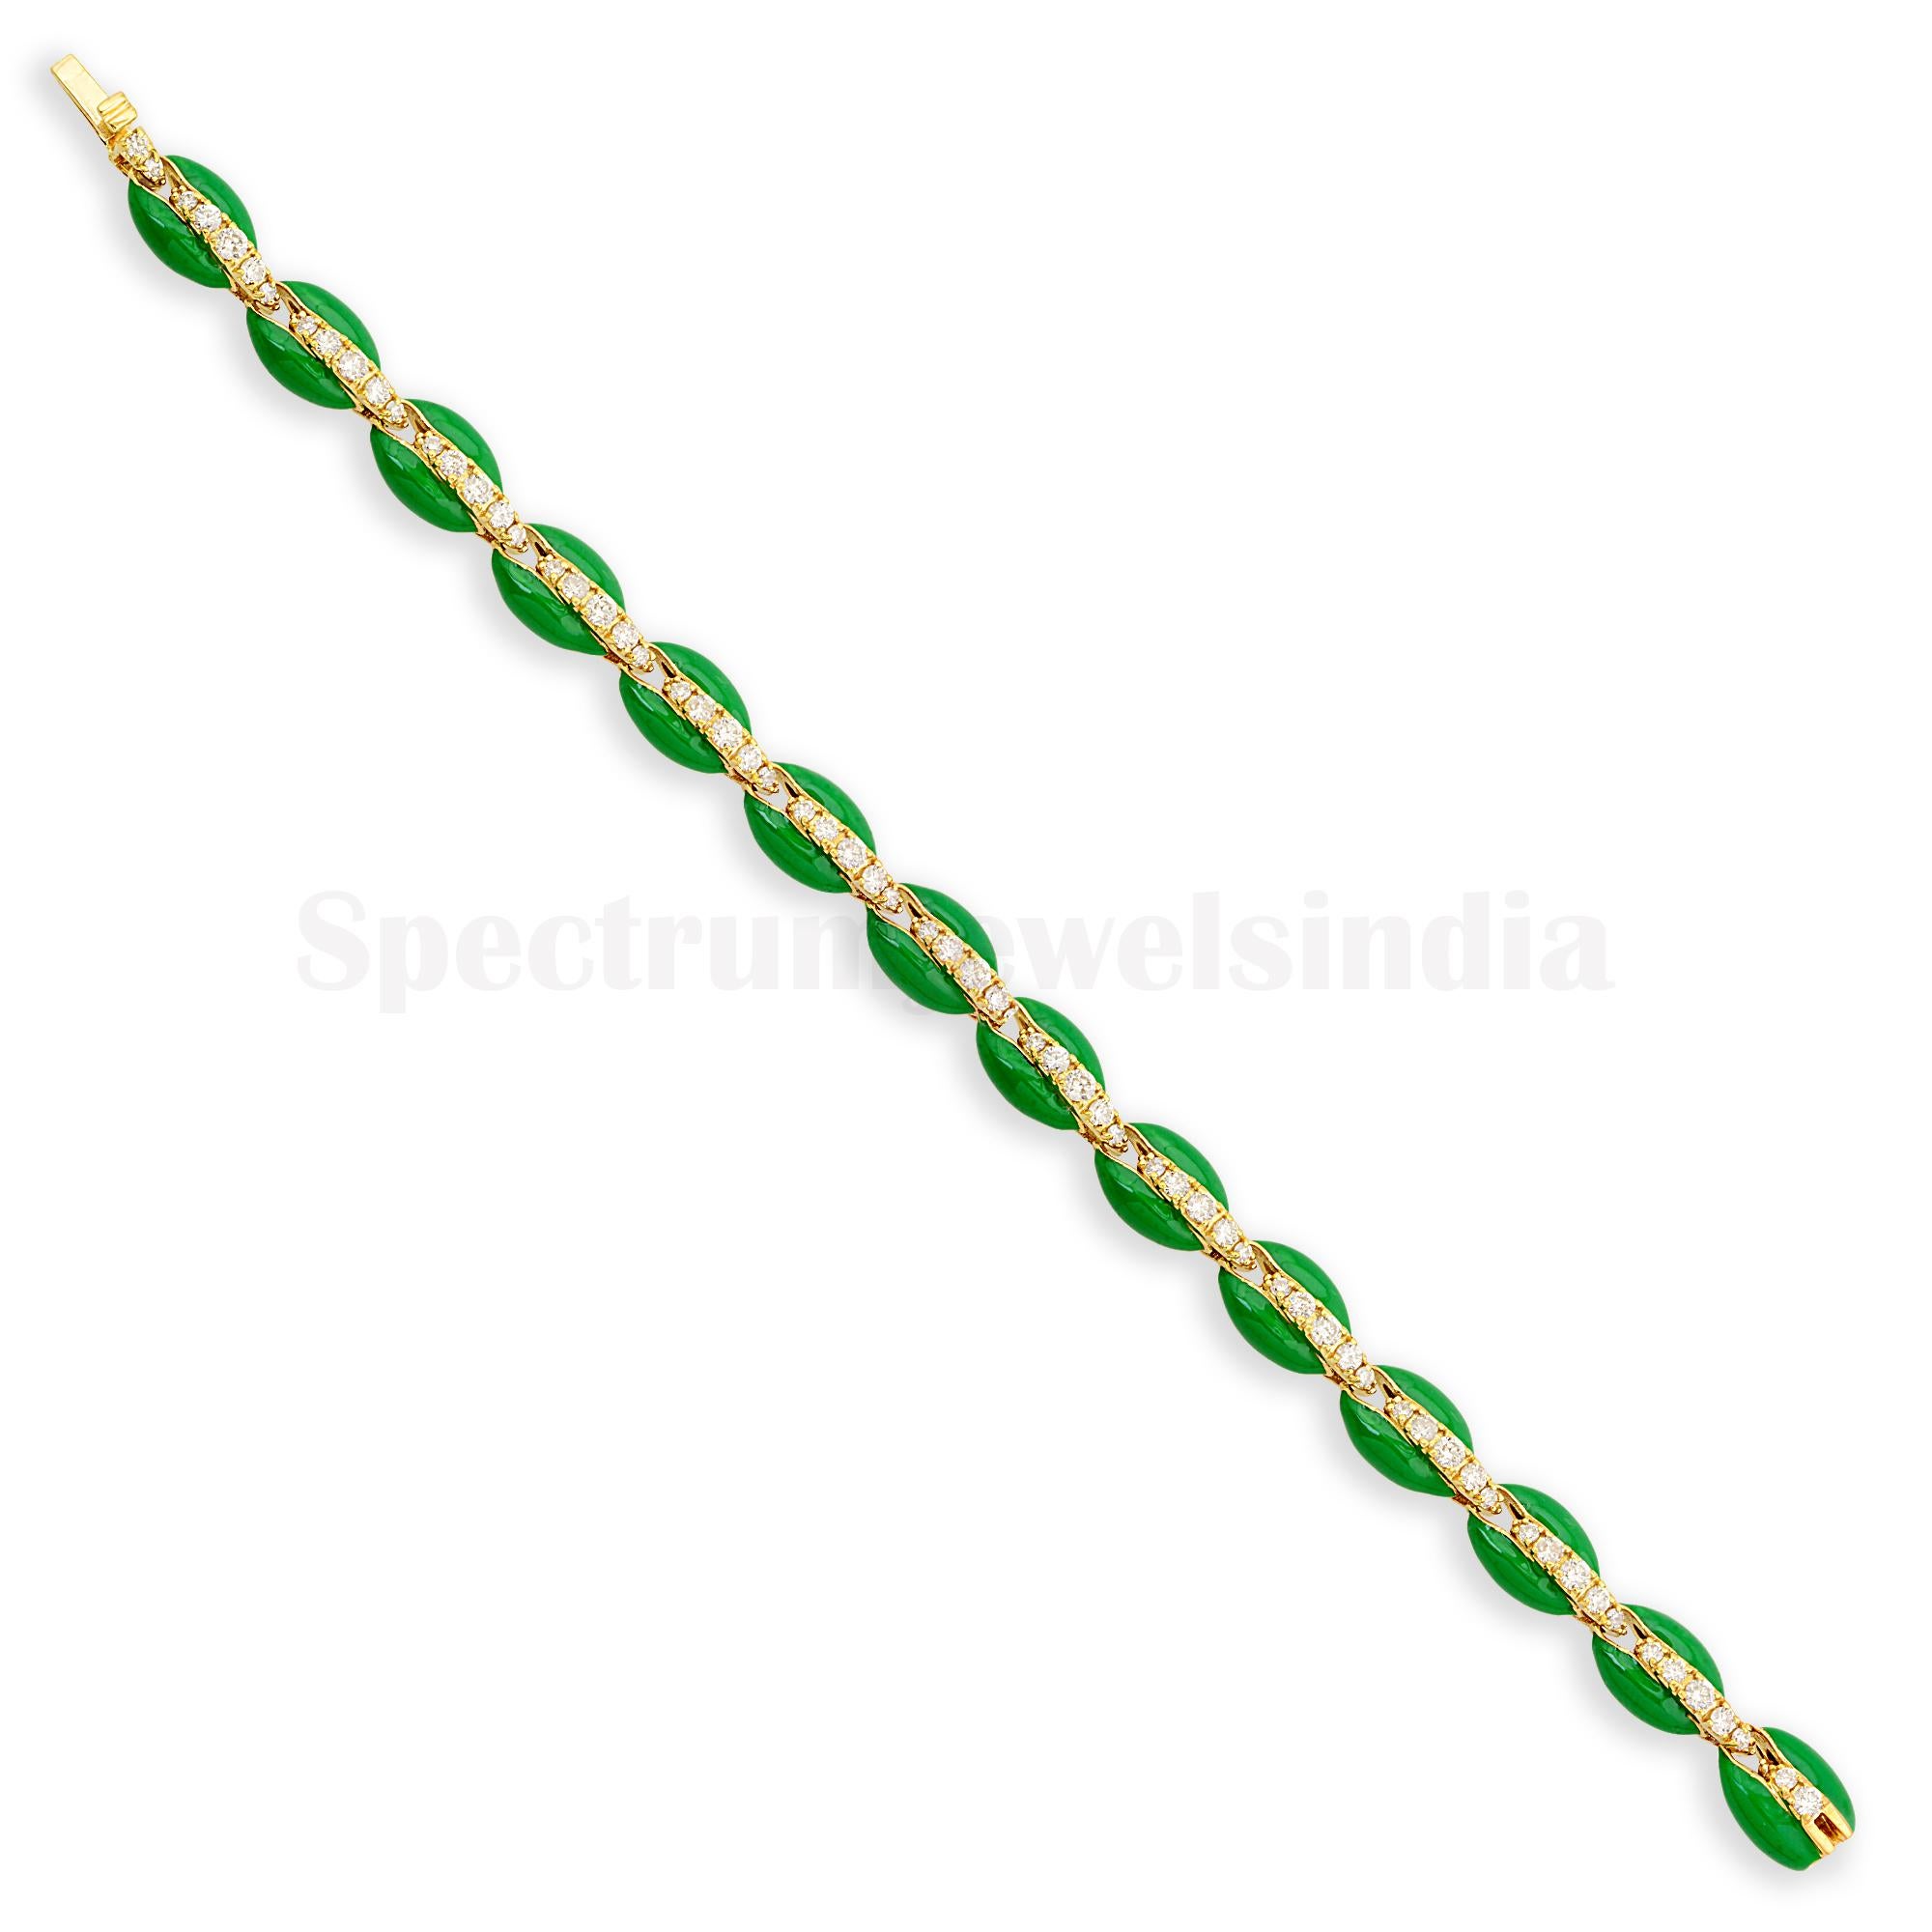 Item Code :- STBR-4044E
Gross Weight :- 15.49 gm
10k Yellow Gold Weight :- 15.12 gm
Diamond Weight :- 1.85 carat  ( AVERAGE DIAMOND CLARITY SI1-SI2 & COLOR H-I )
Bracelet Length :- 7 Inches Long
✦ Sizing
.....................
We can adjust most